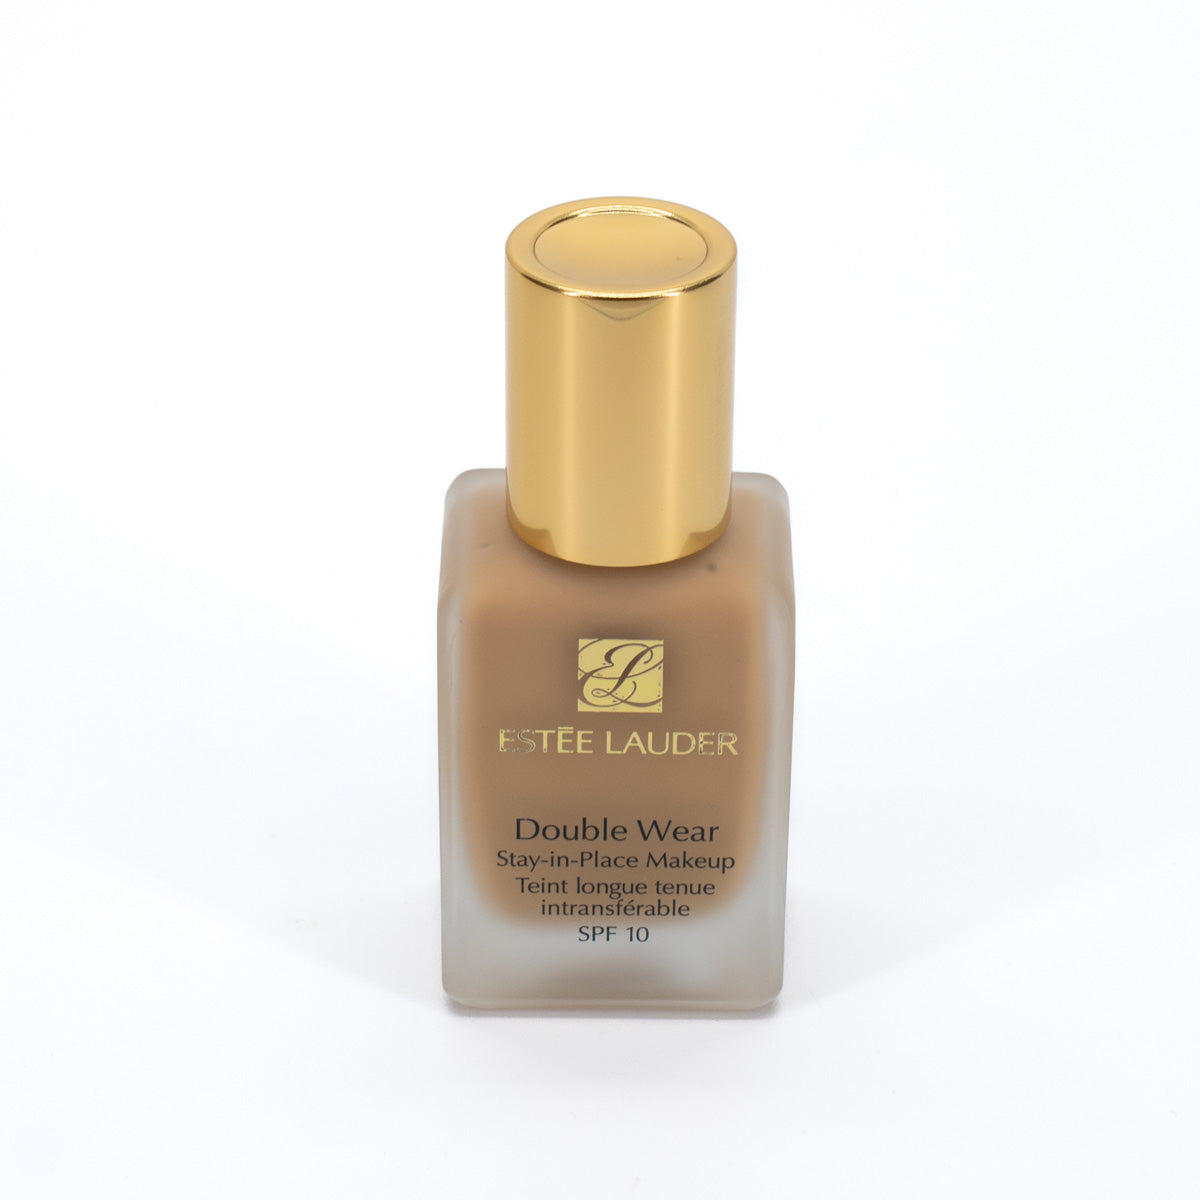 ESTEE LAUDER Double Wear Stay-in-Place Makeup 3N2 WHEAT 1oz - Missing Box